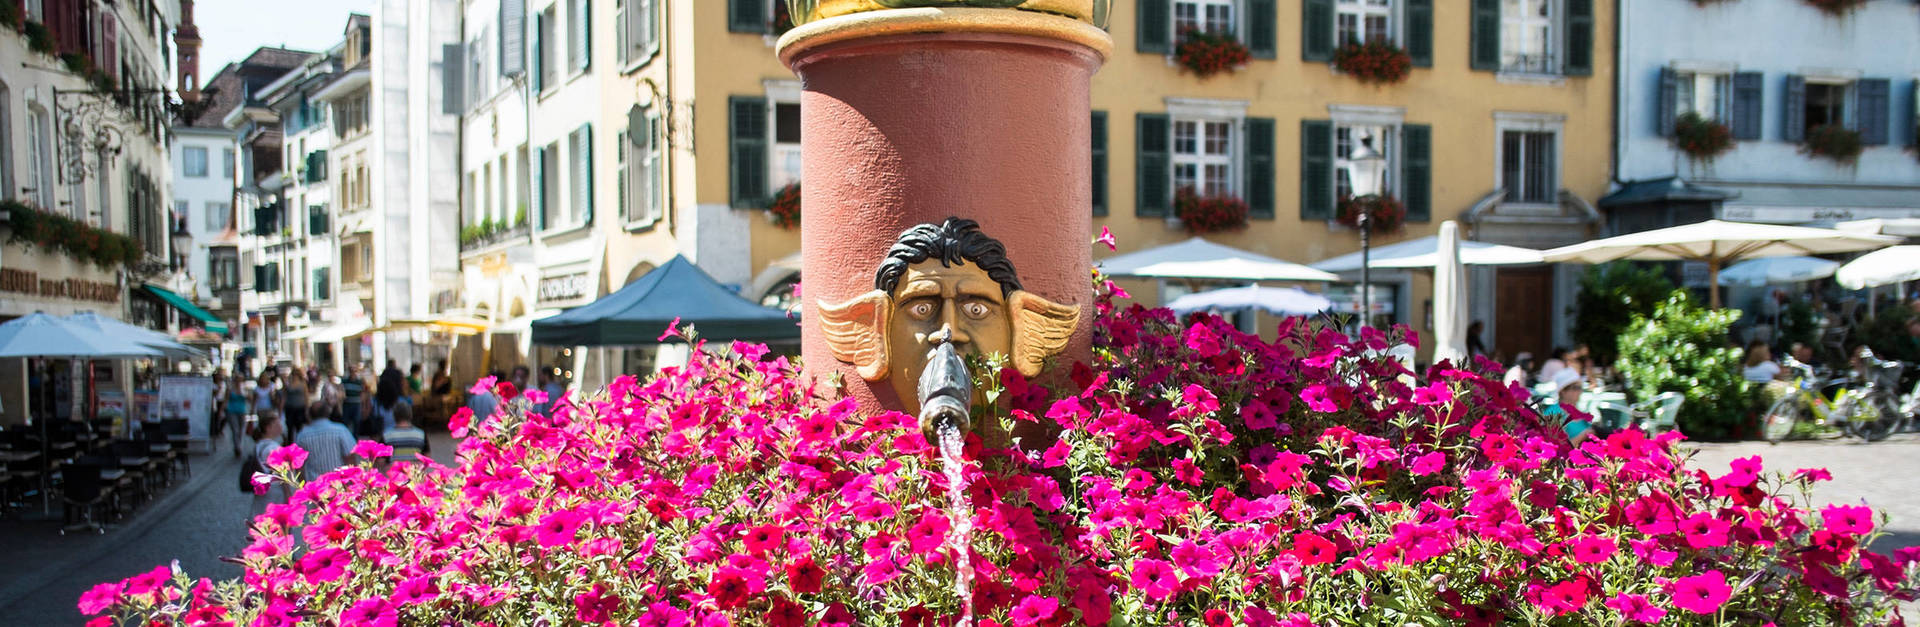 Well-connected in the heart of Solothurn - H4 Hotel Solothurn - Official website